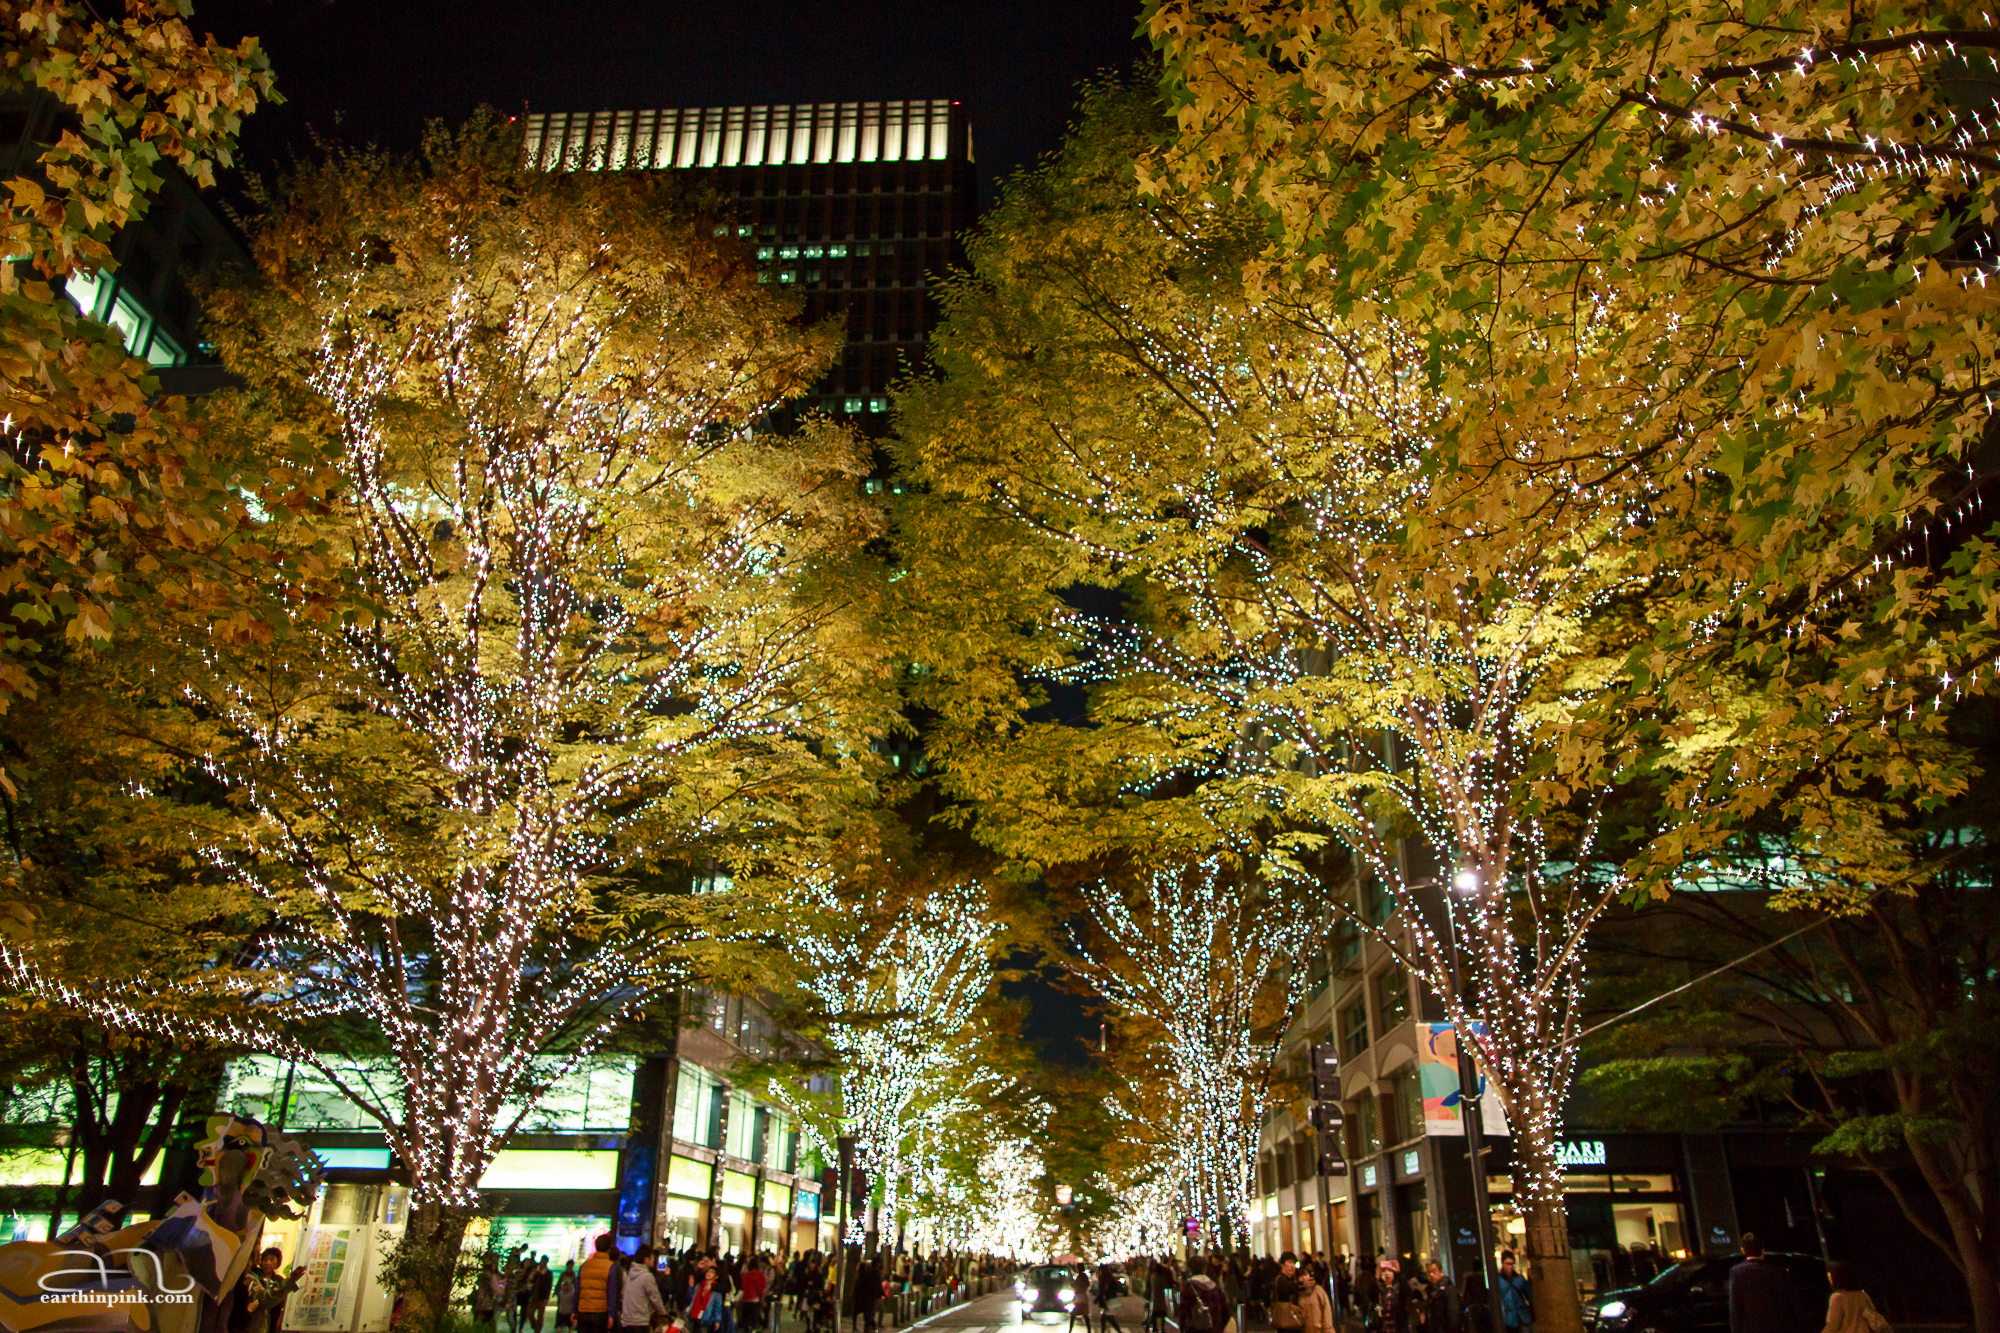 Marunouchi Illumination close to Tokyo station. This was taken in the third week of November and the trees hadn't yet lost their leaves, but in Tokyo it's never too early to get into the Christmas spirit!